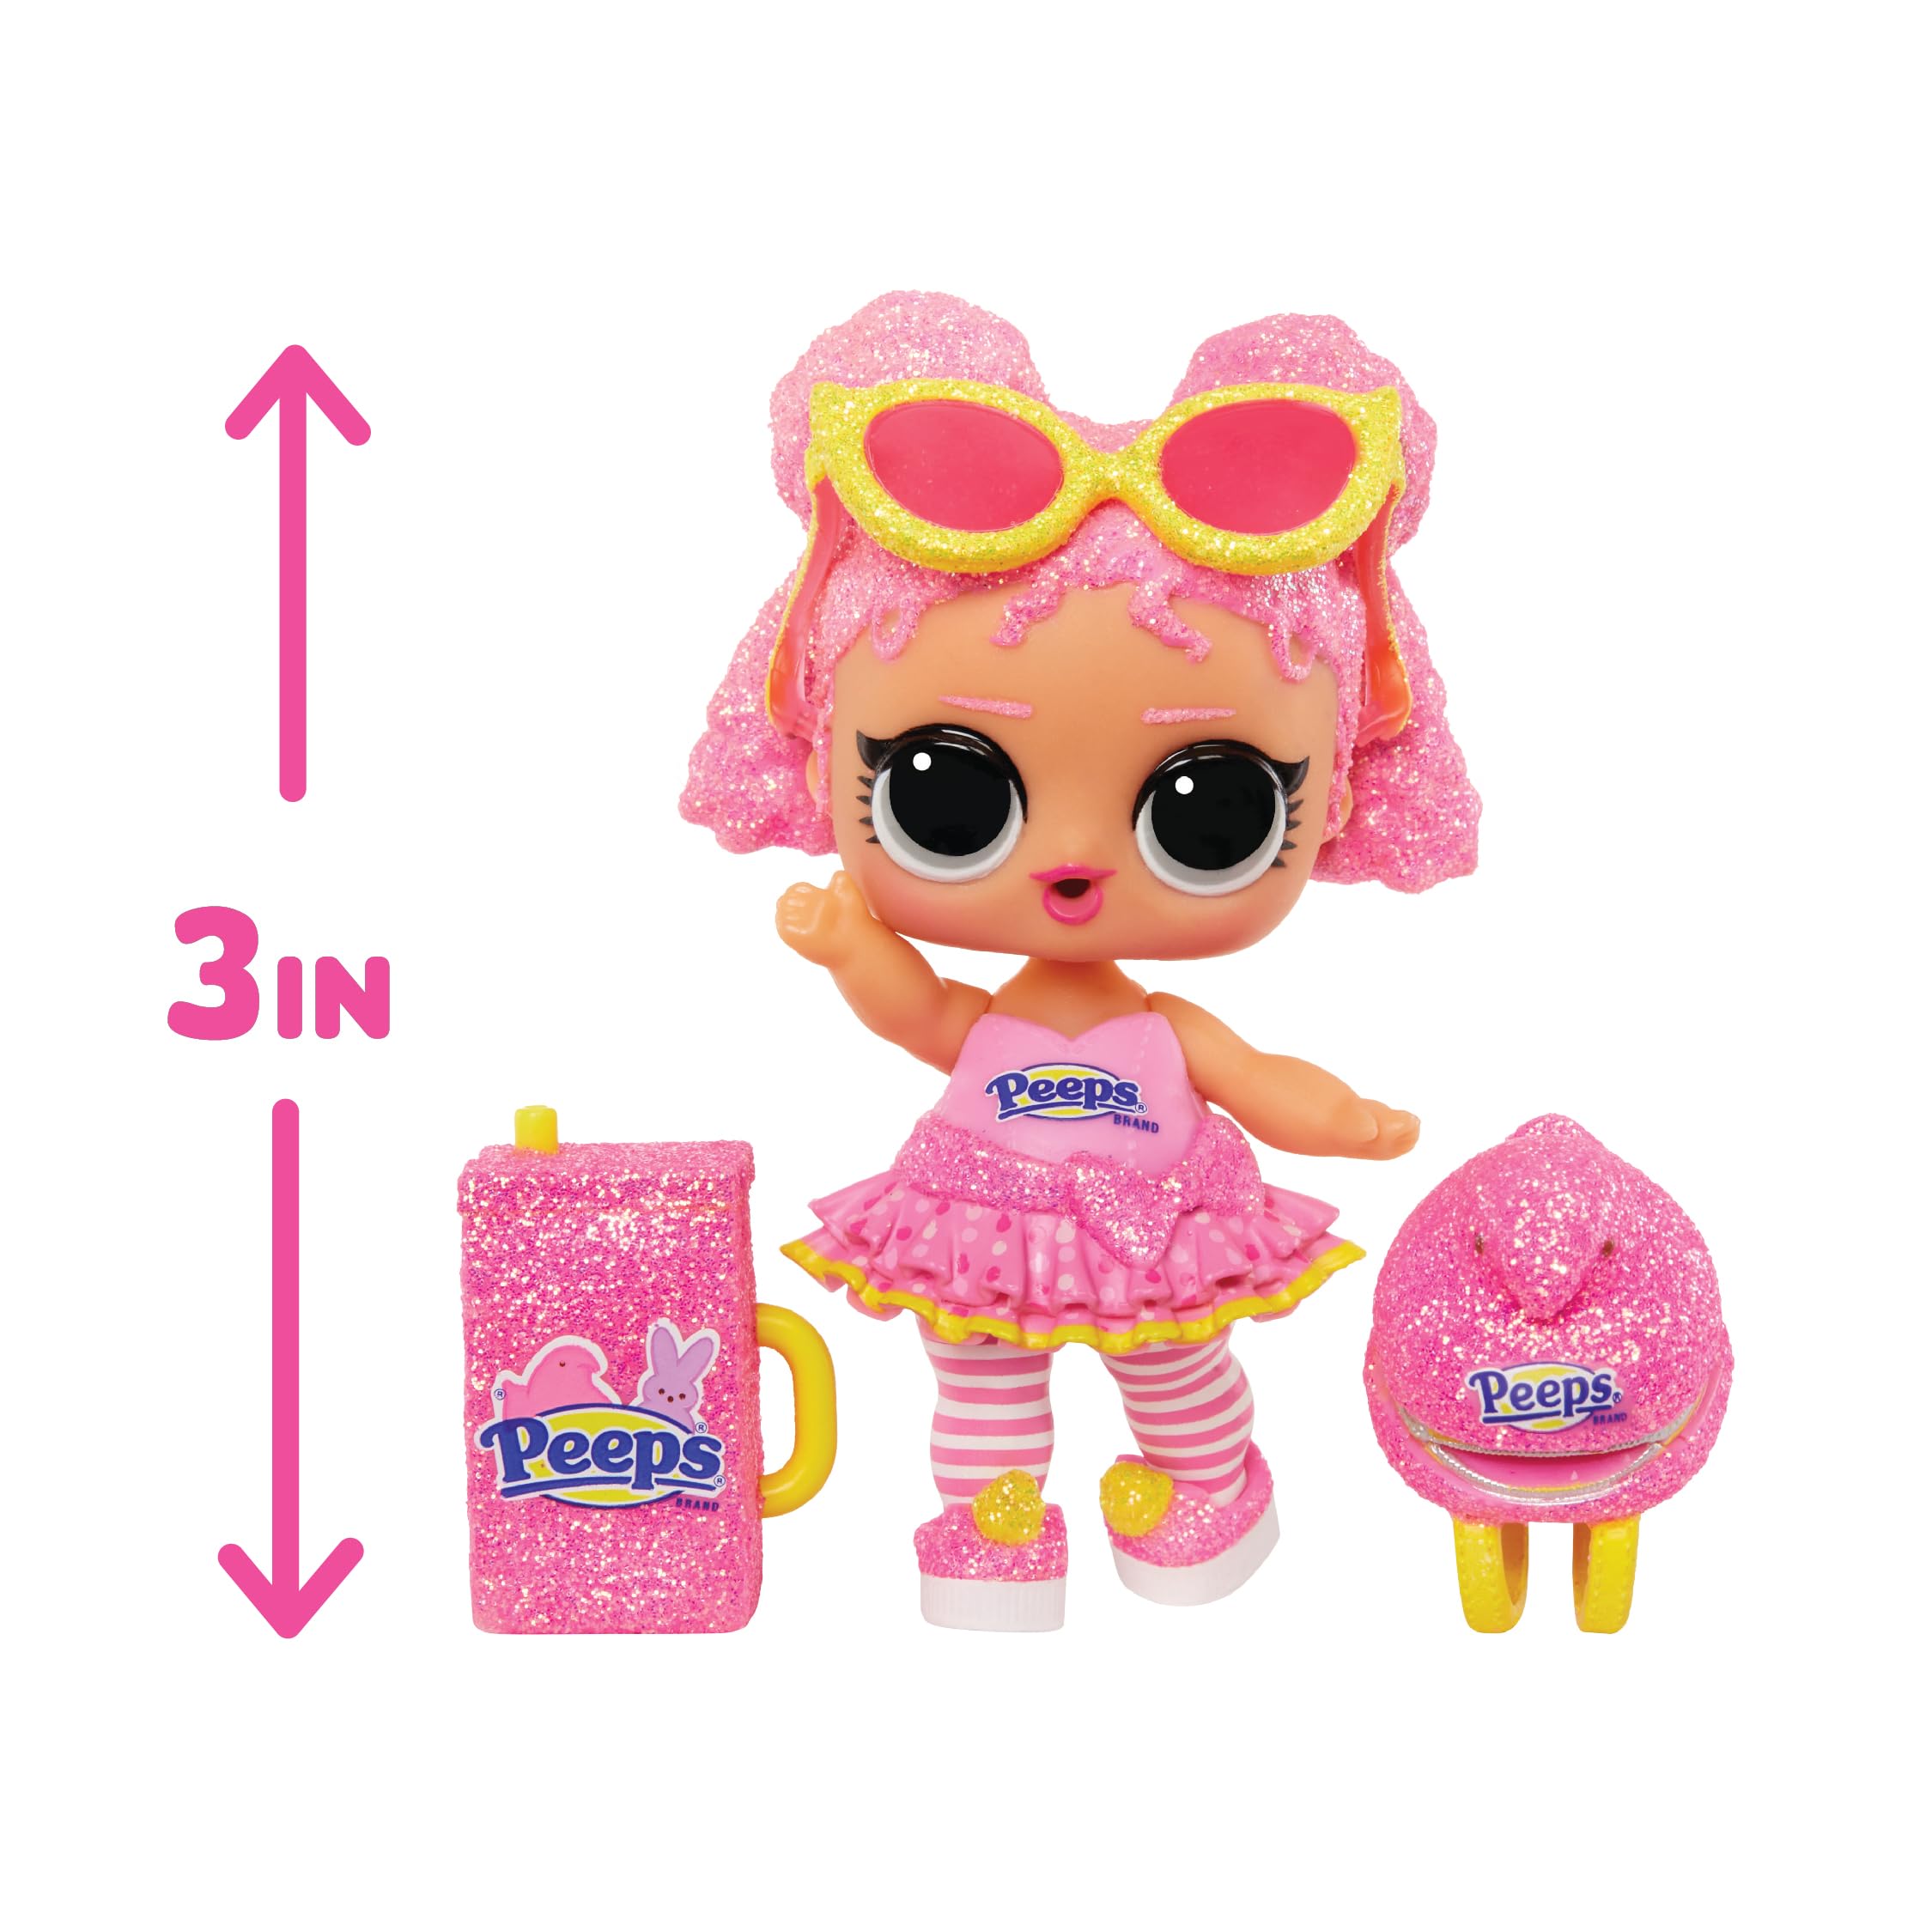 LOL Surprise! Loves Mini Sweets - Peeps – Fluff Chick – with Collectible Doll, 7 Surprises, Spring Theme, Peeps Limited Edition Doll- Great Gift for Girls Age 4+